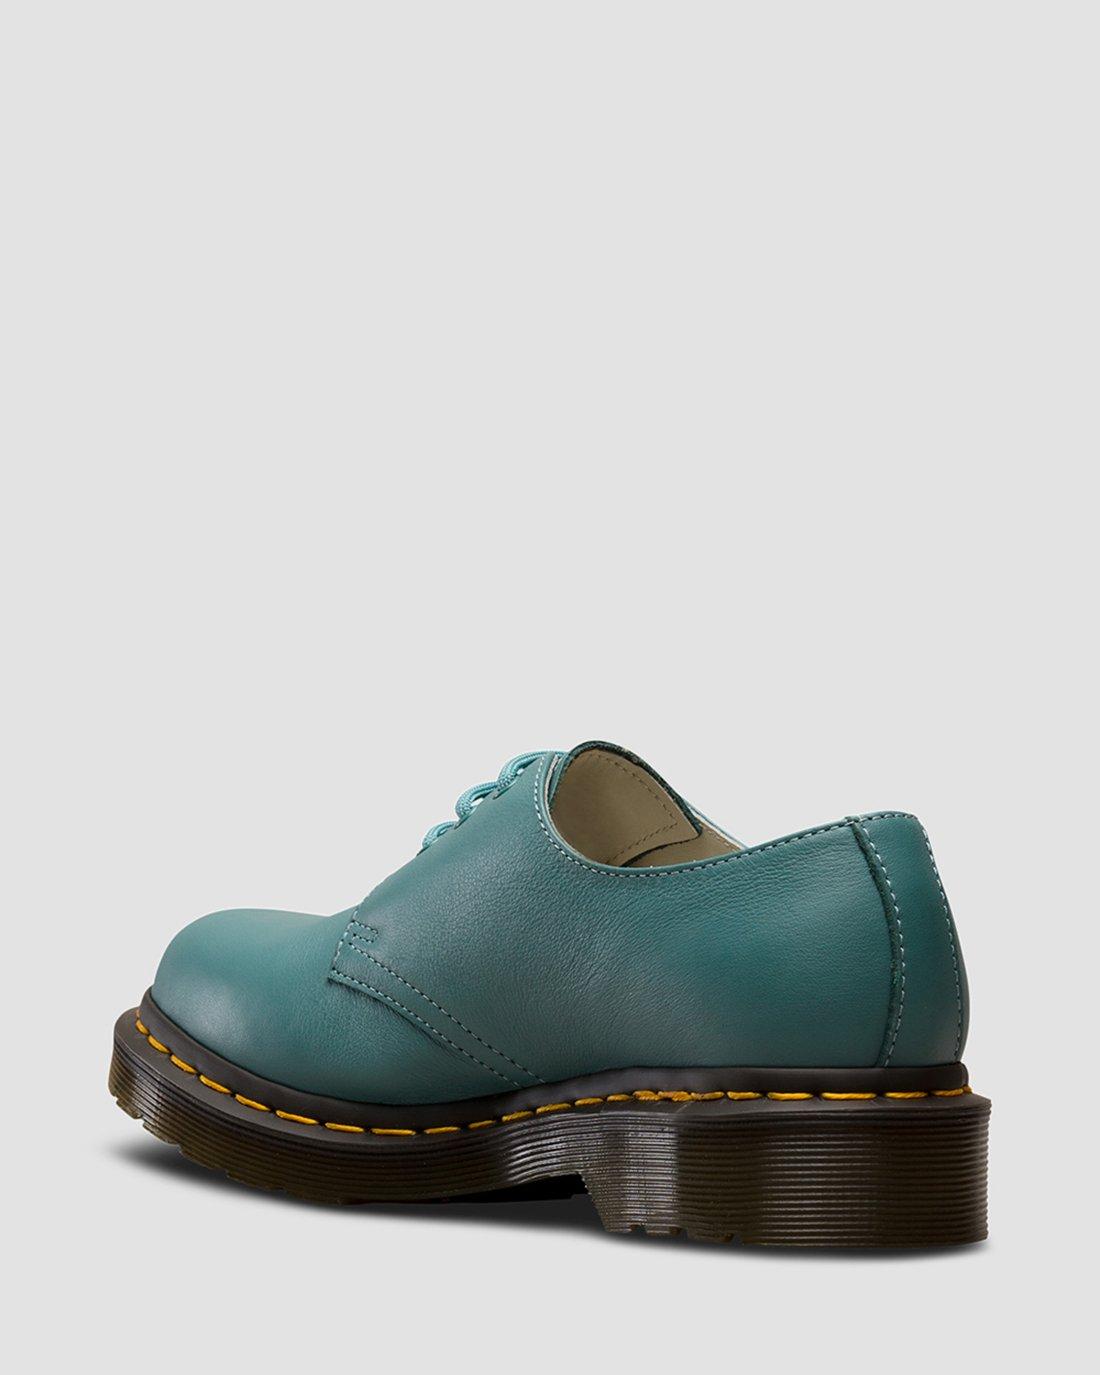 1461 Virginia Leather Oxford Shoes | Dr. Martens